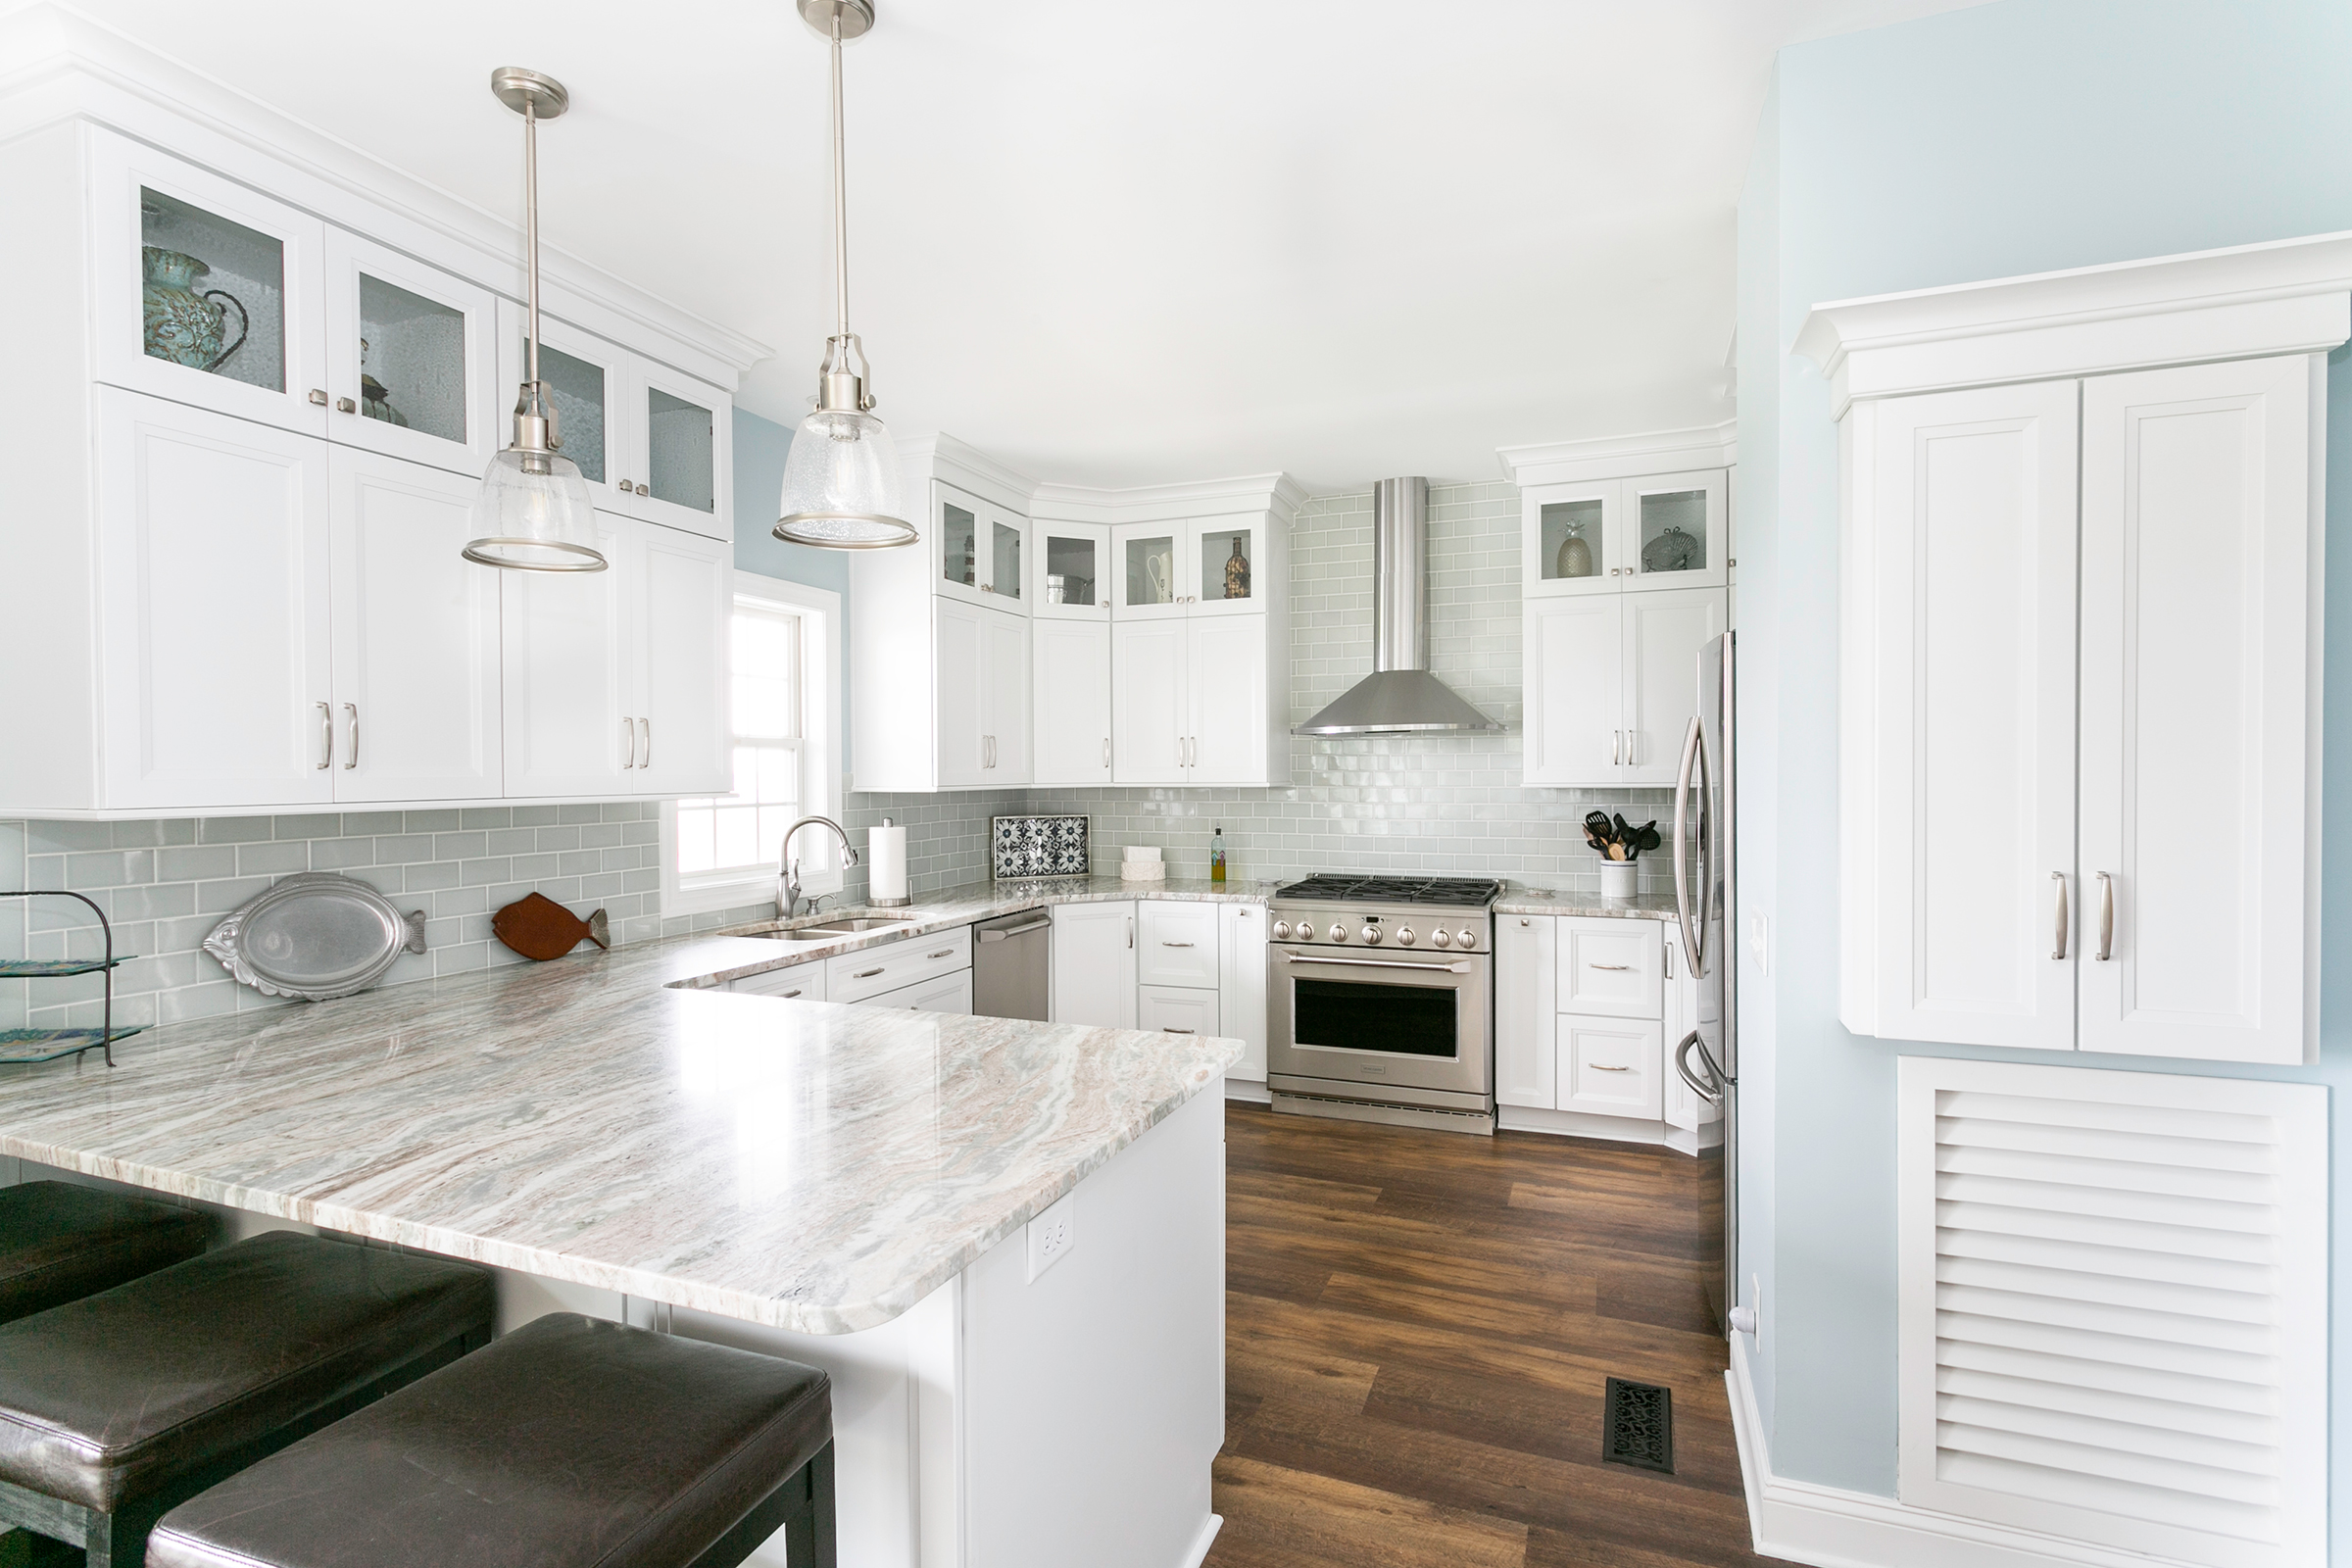 Bright and airy coastal-style kitchen with KraftMaid Dove White cabinets